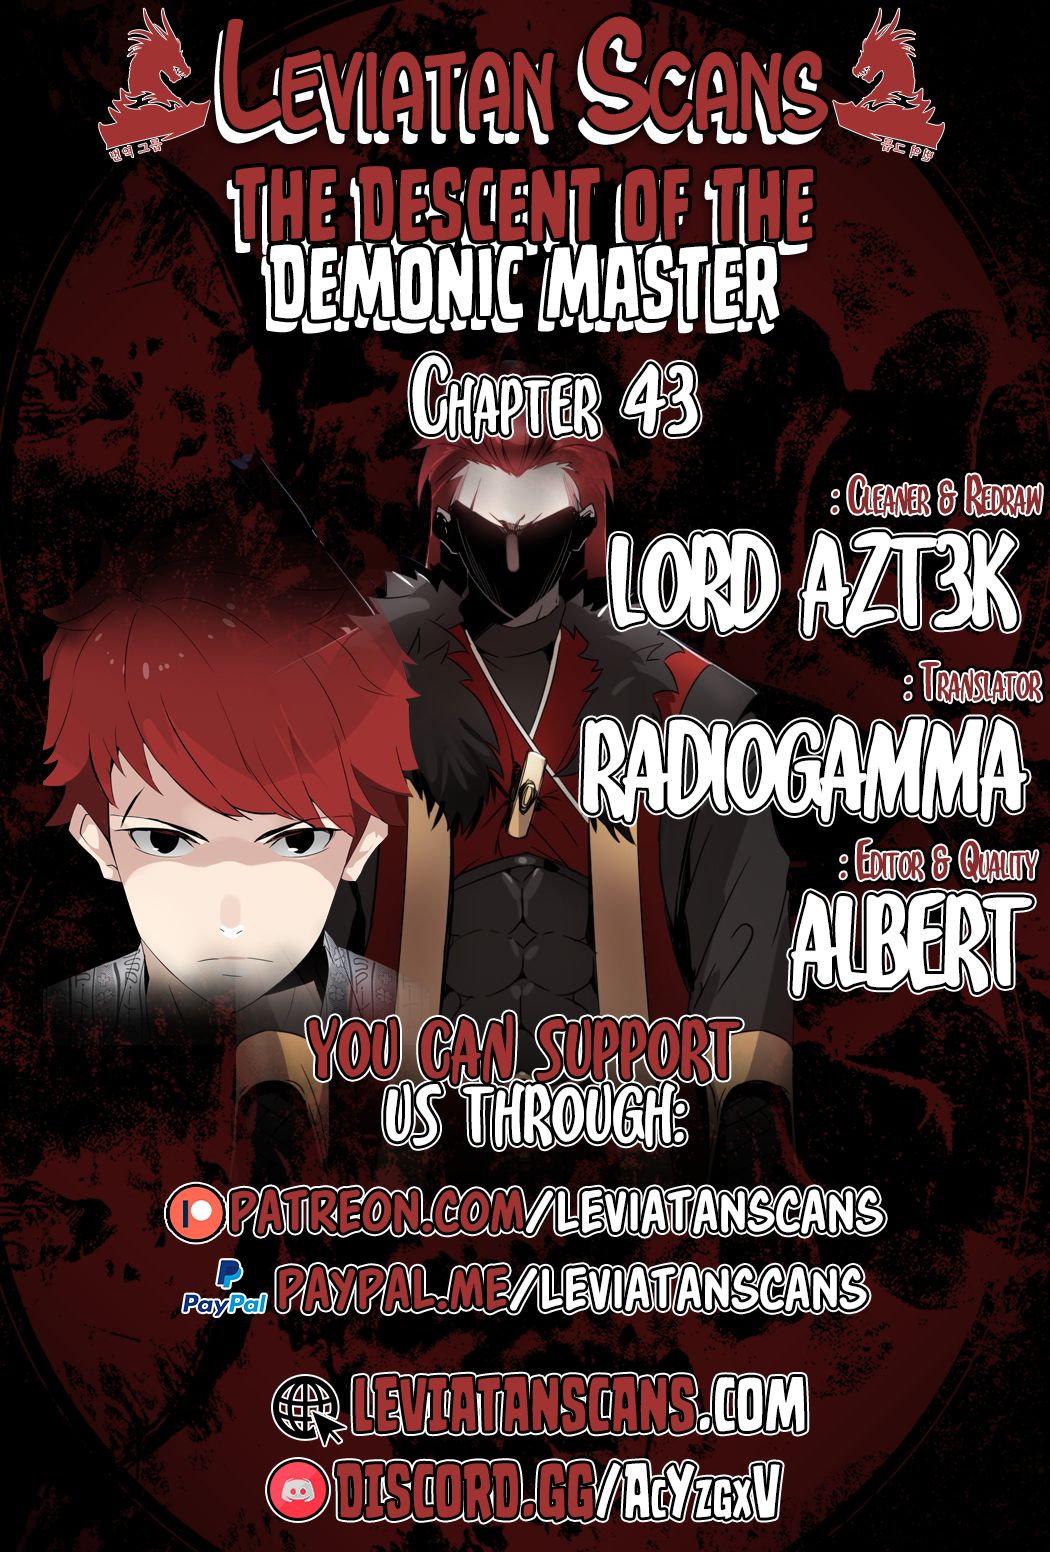 The Descent Of The Demonic Master Chapter 43